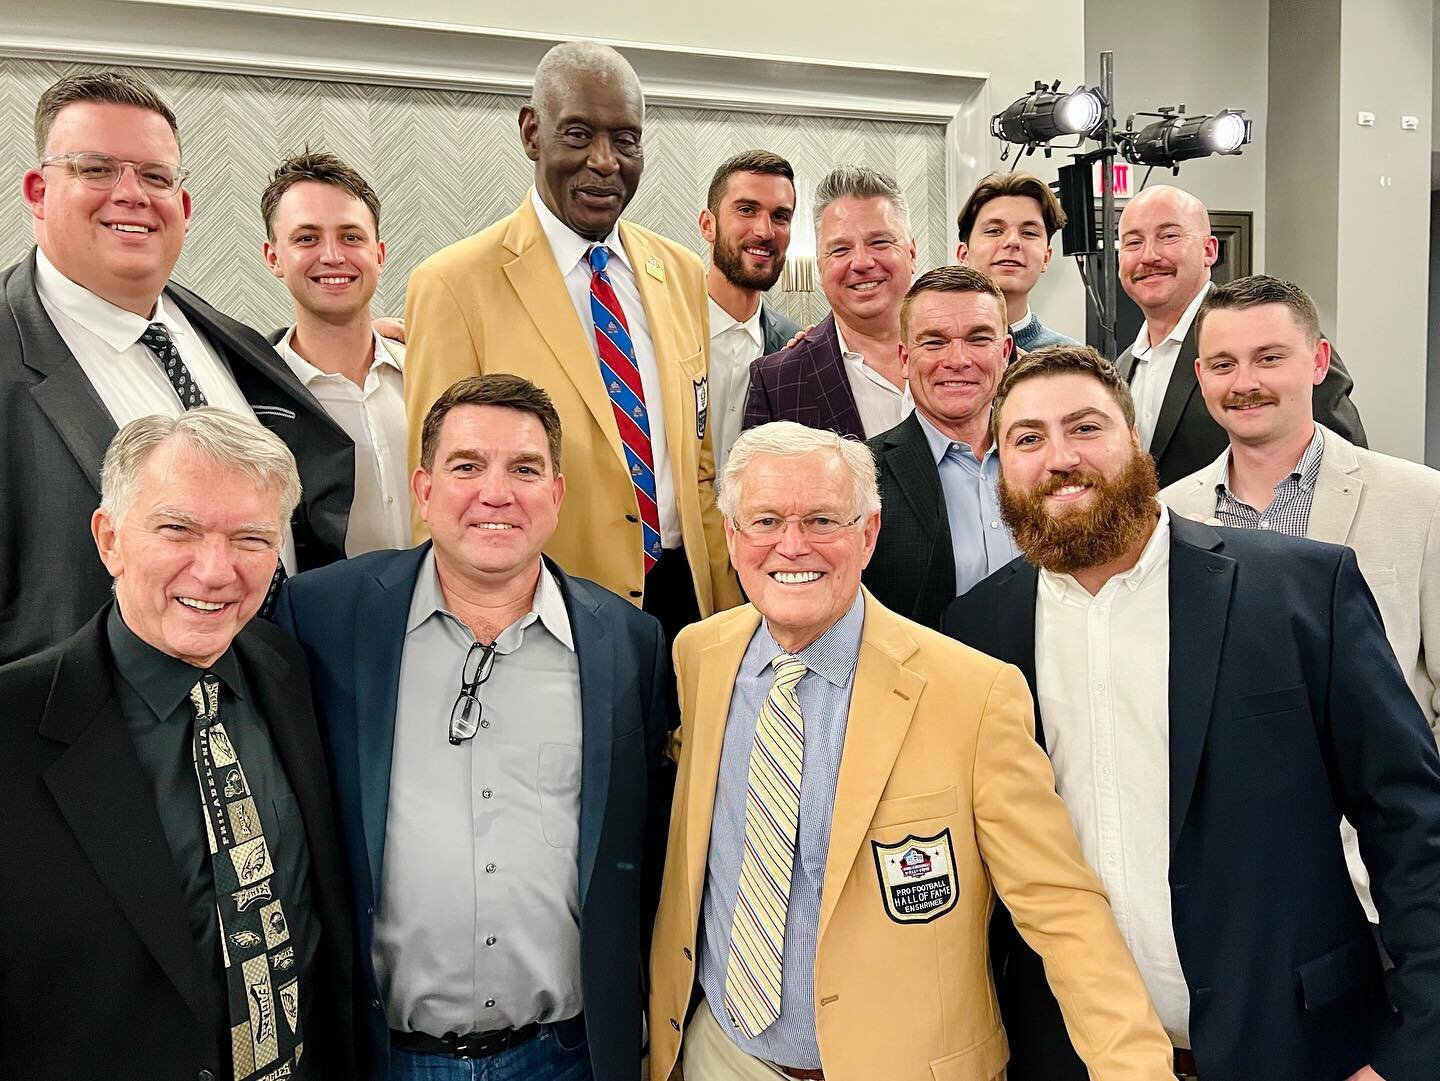 Awesome night at the Otho Davis Scholarship Foundation Awards Dinner celebrating Dick Vermeil&rsquo;s Pro Football Hall of Fame induction and Ray Didinger&rsquo;s ODSF Dick Vermeil Lifetime Achievement Award. Pro Football Hall-of-Famers Harold Carmic